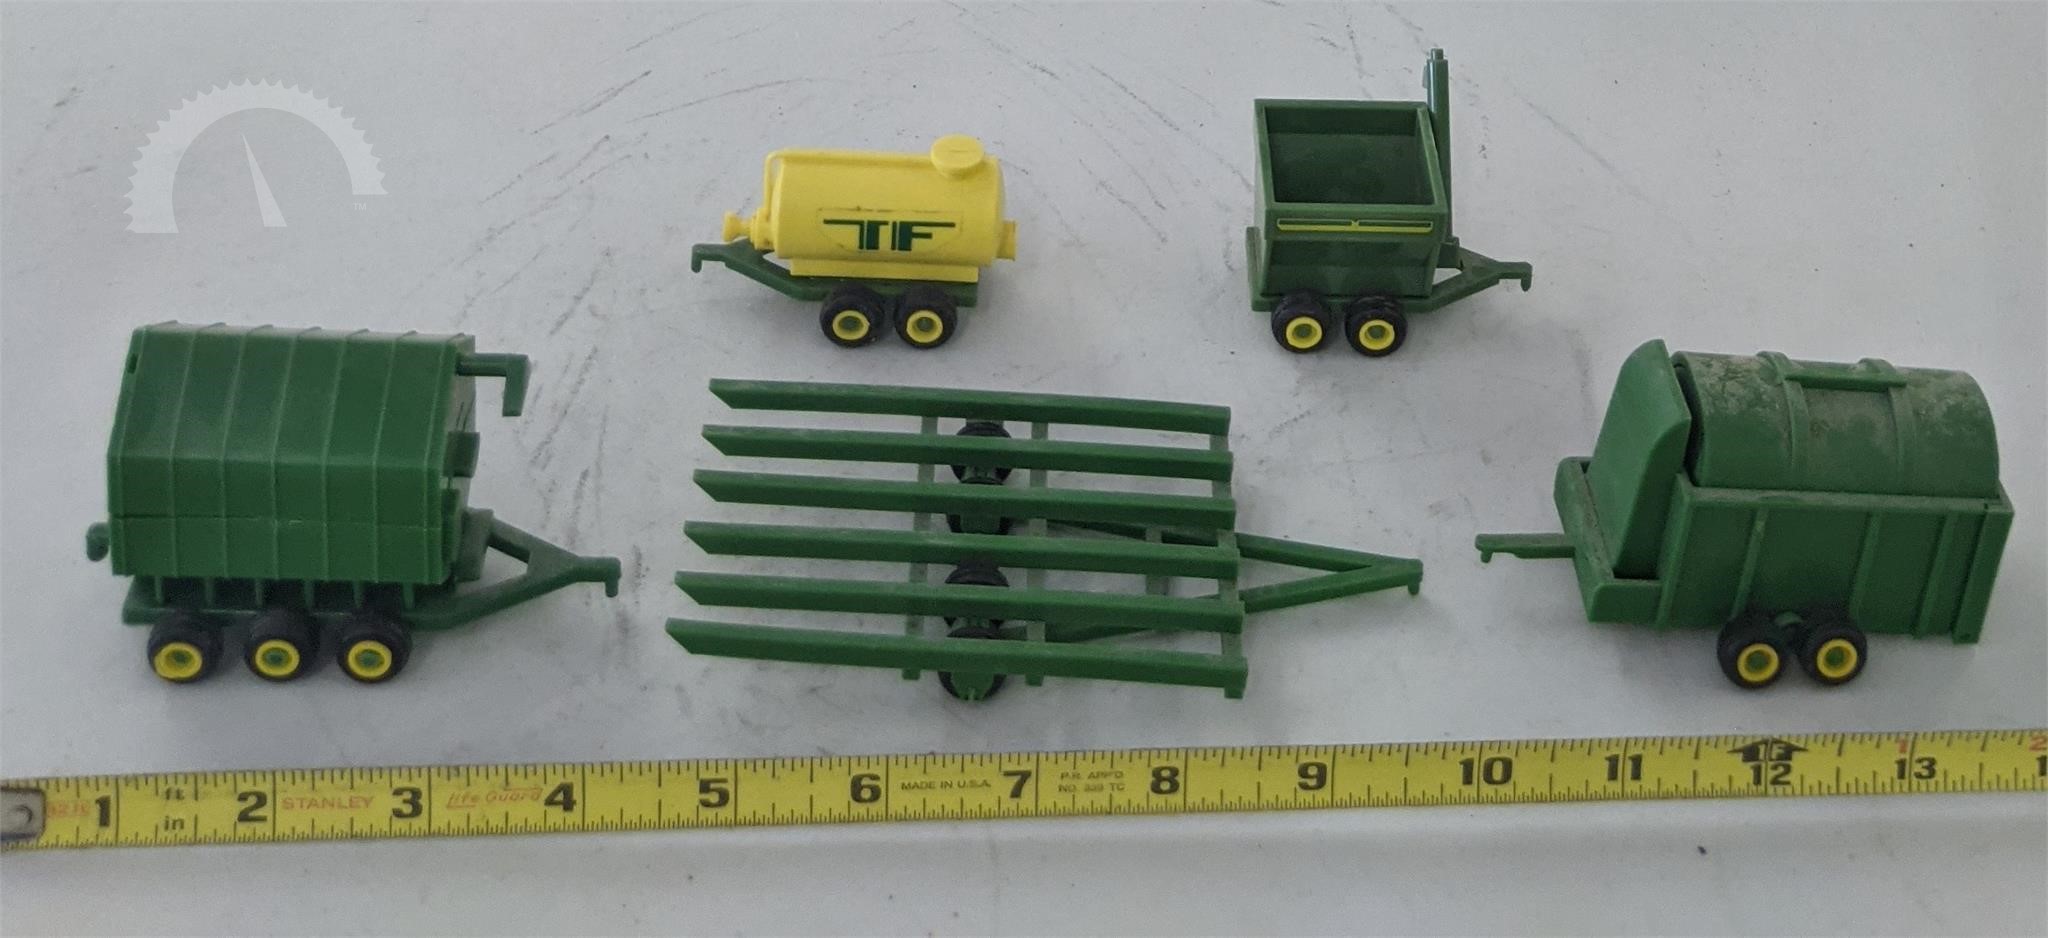 Truck Drive Steer & Trailers Rubber Tires for 1/48 or 1/50 scale 2 KMM-02 